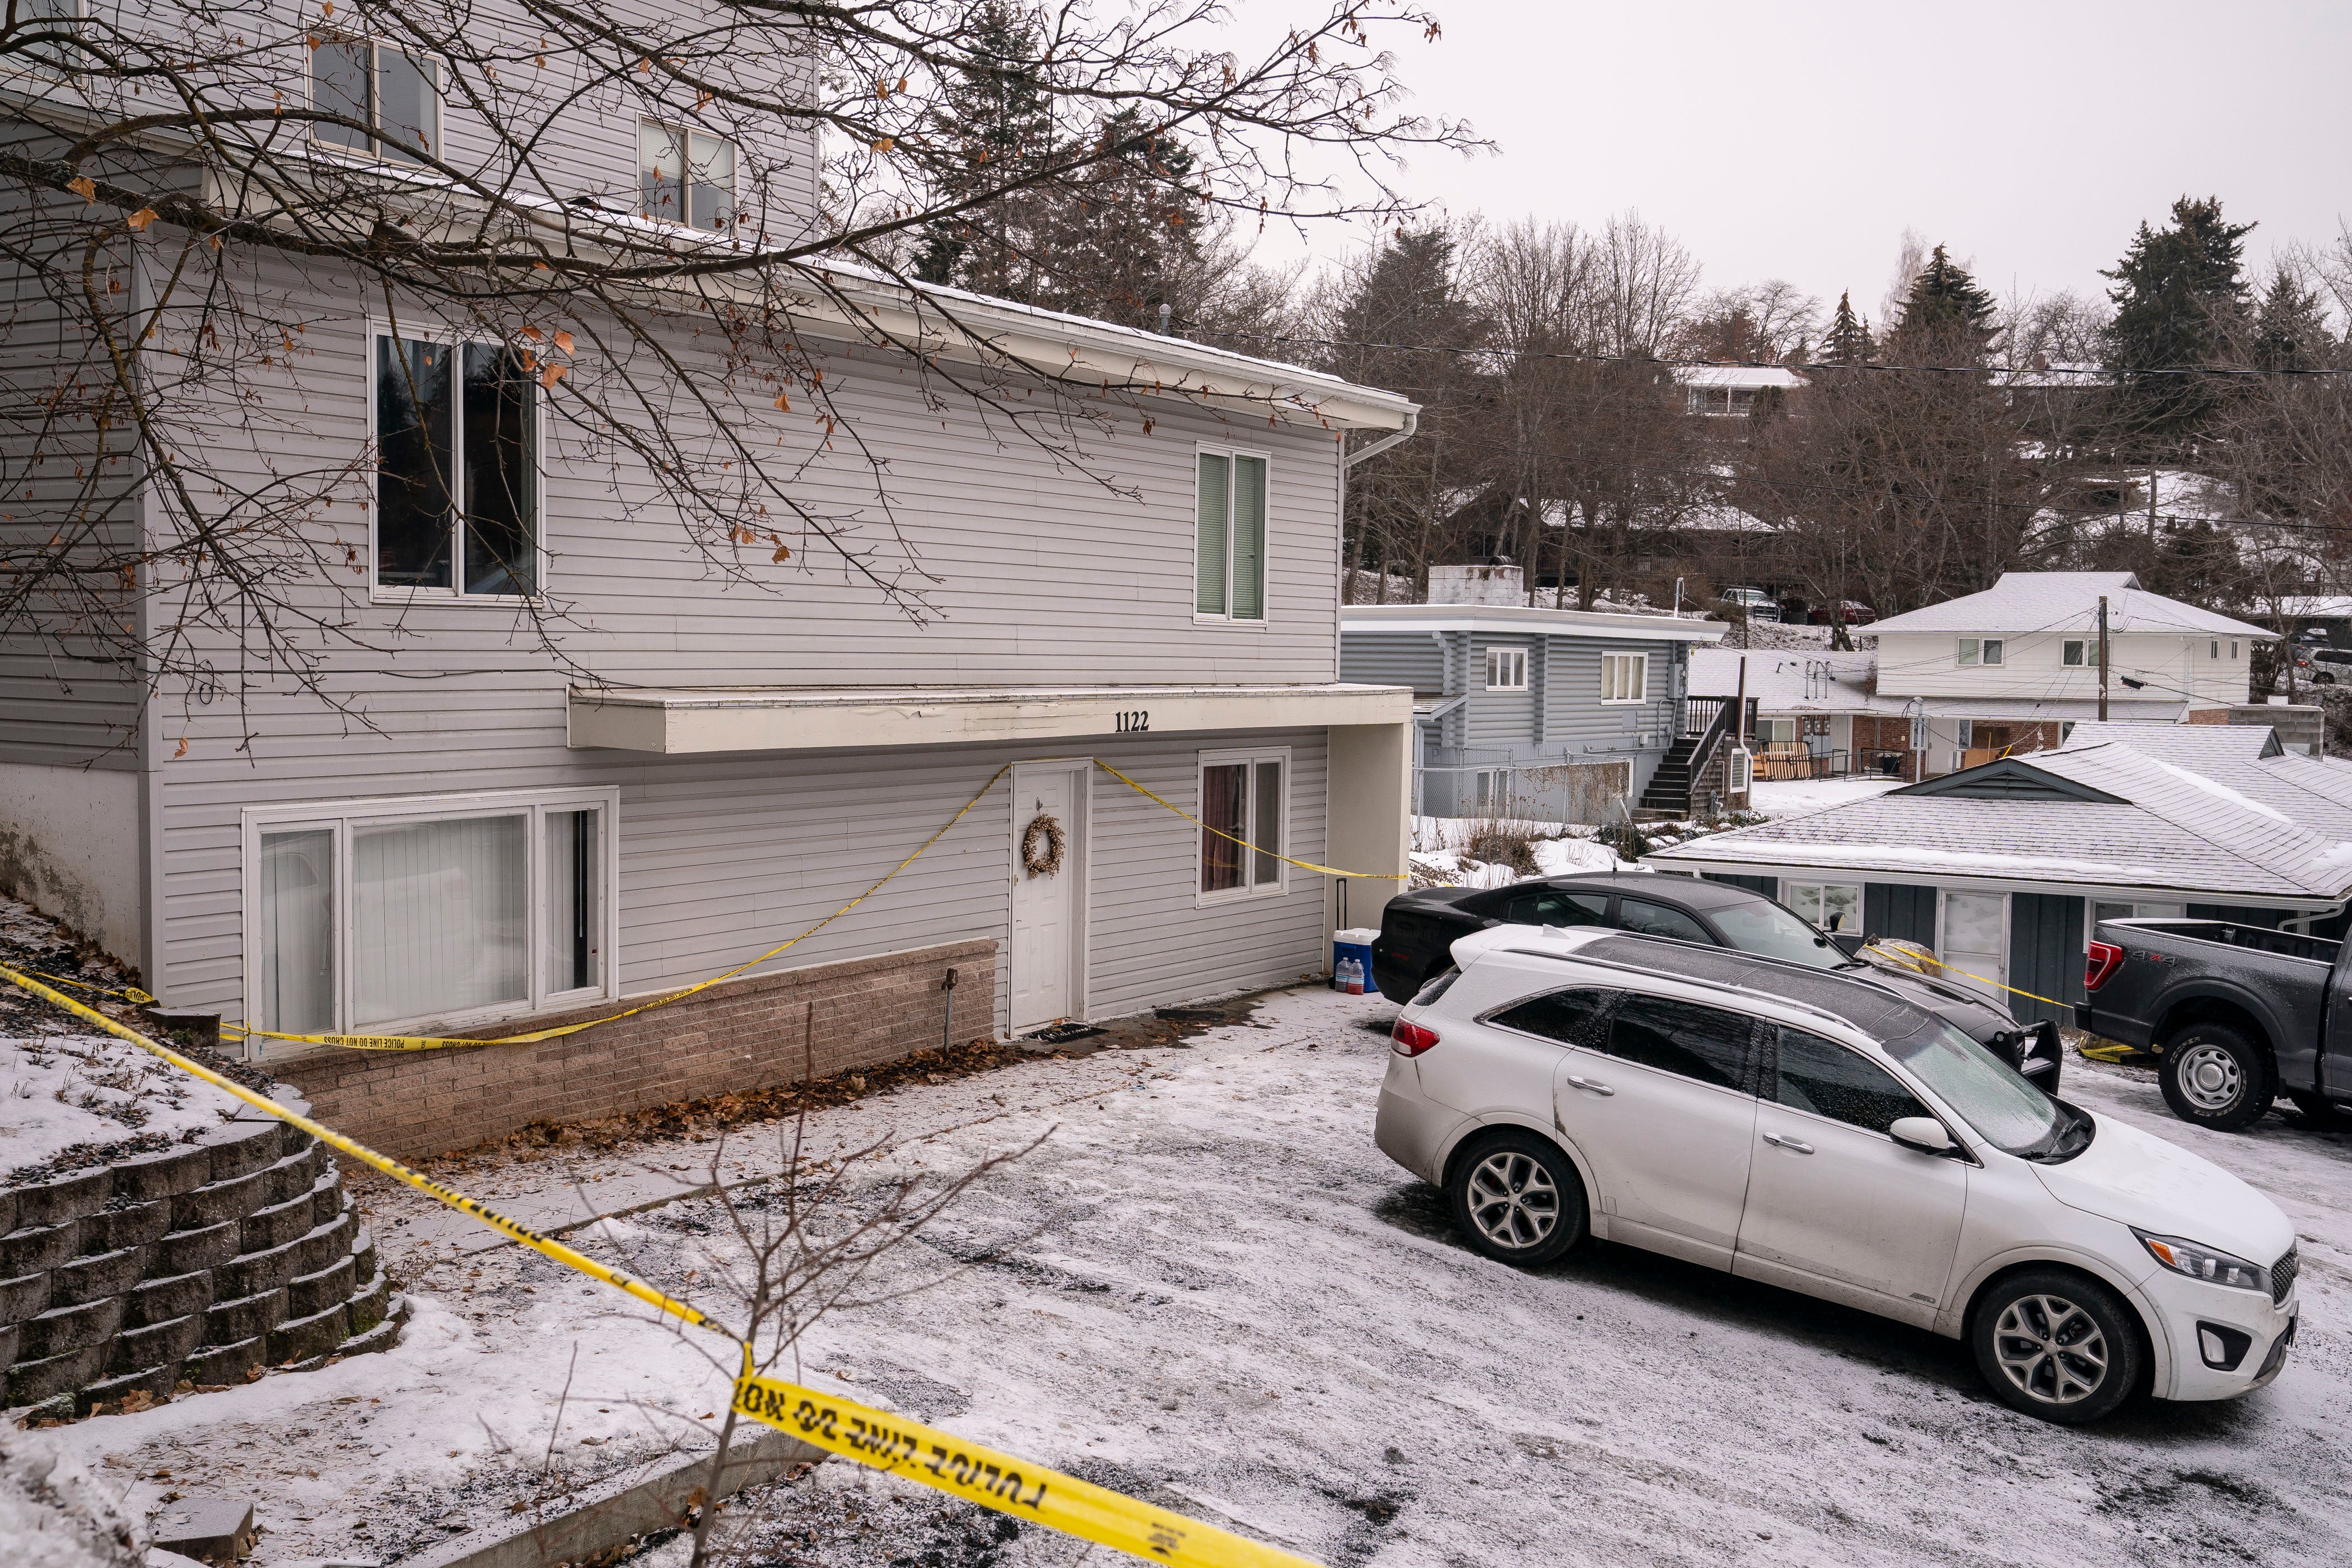 Police tape surrounds the home where the four students were killed